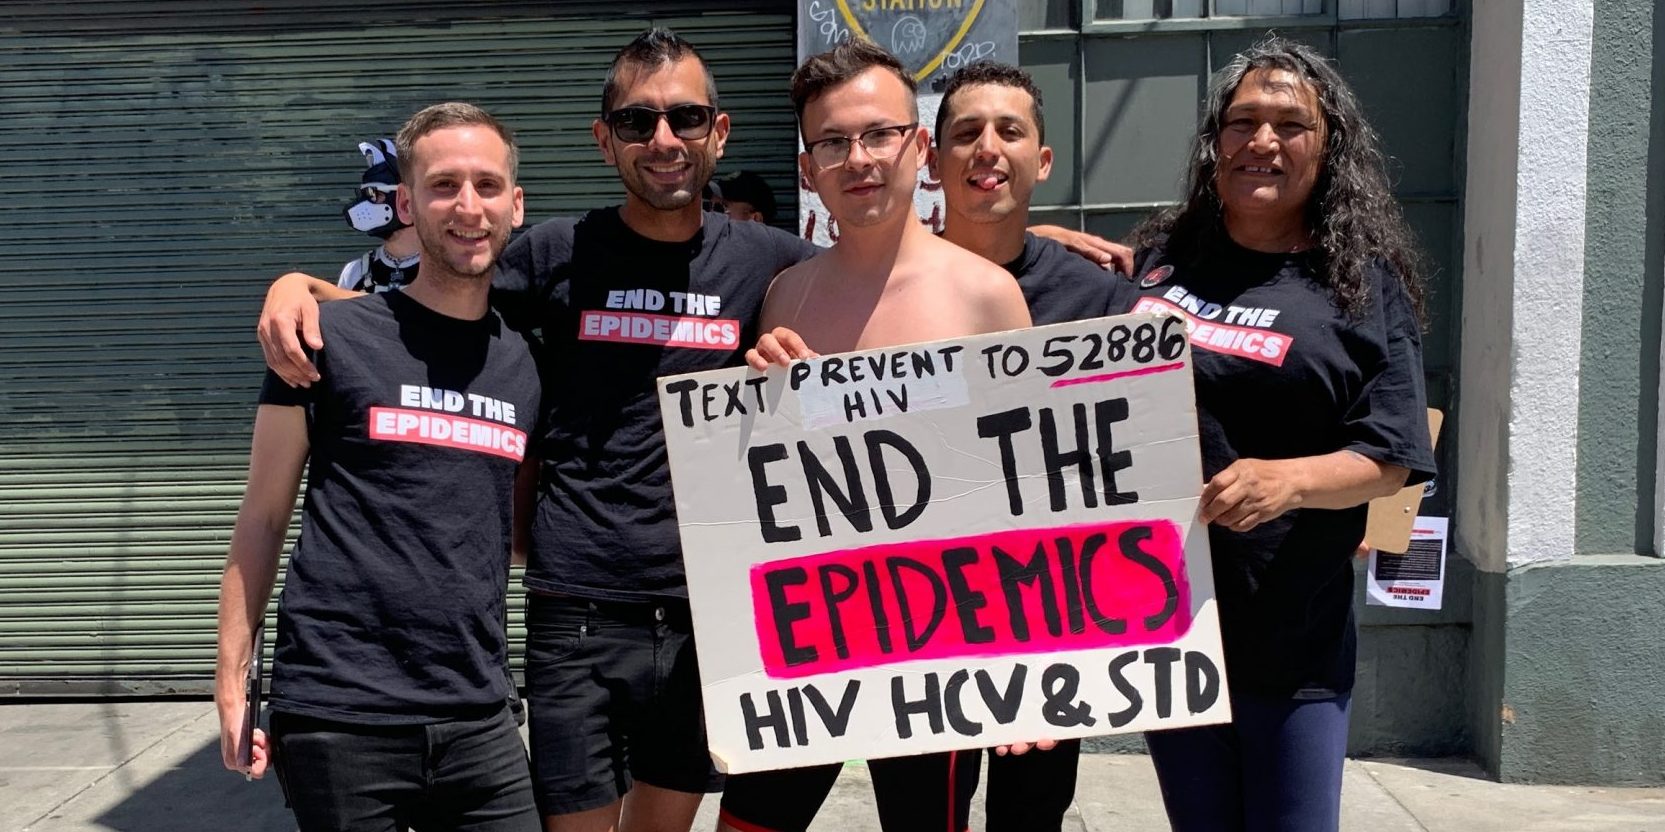 HAN activists attend Dore Alley Fair to advocate for End the Epidemics